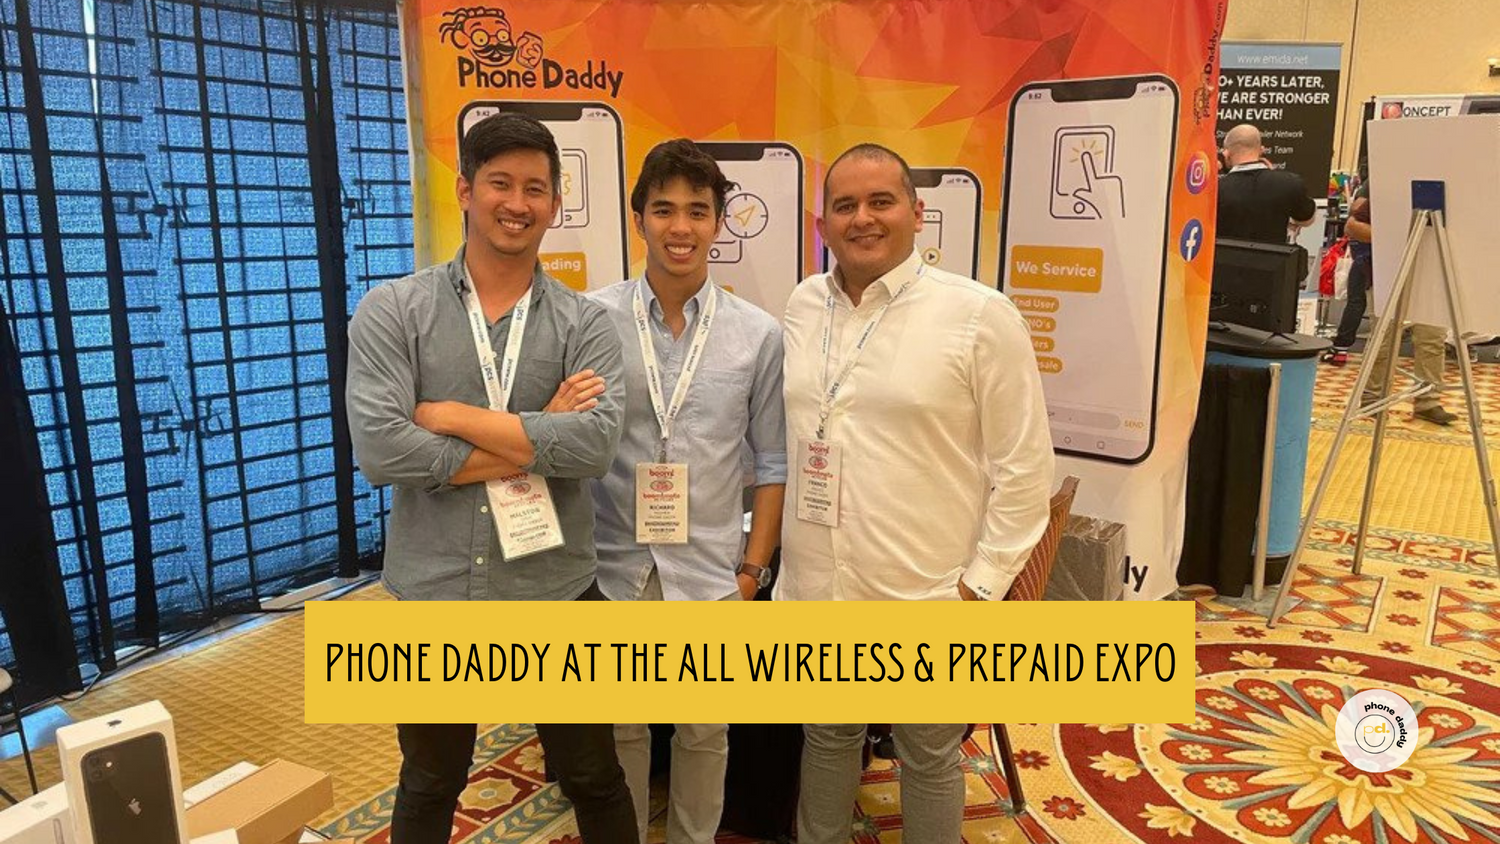 PHONE DADDY ATTENDS THE ALL WIRELESS & PREPAID EXPO IN LAS VEGAS